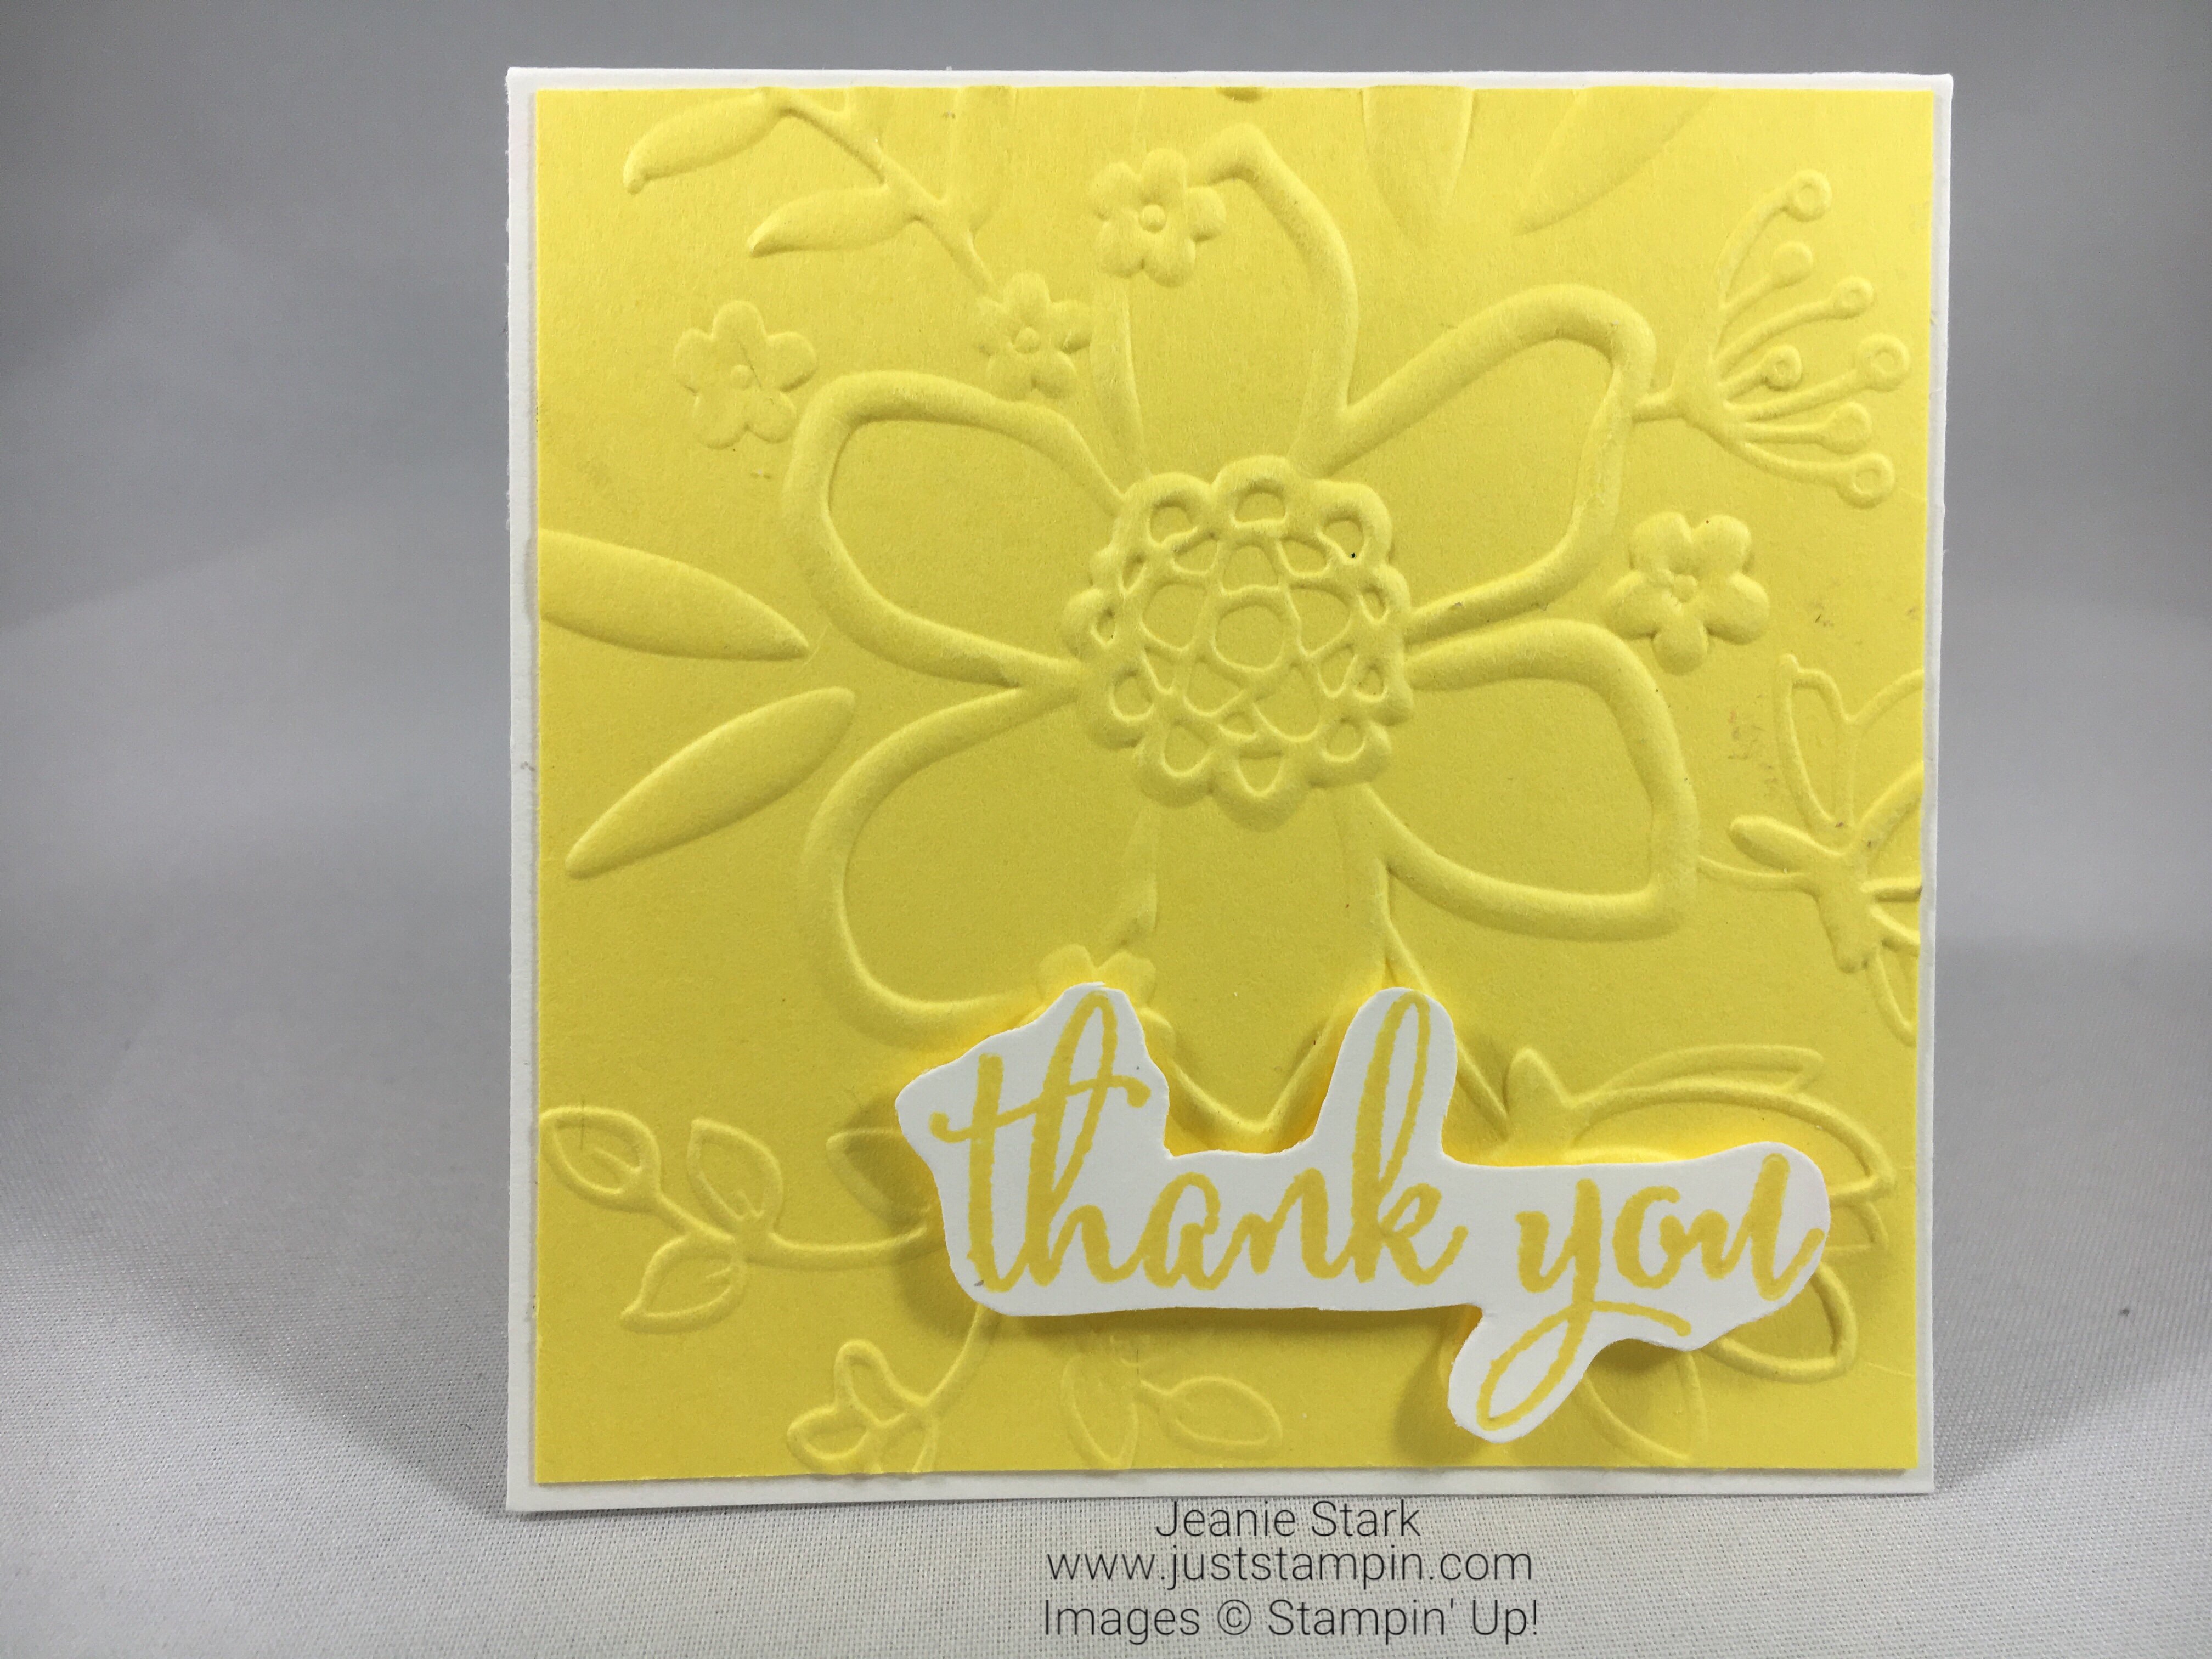 Stampin Up Lovely Floral In Color thank you note card idea - Jeanie Stark StampinUp